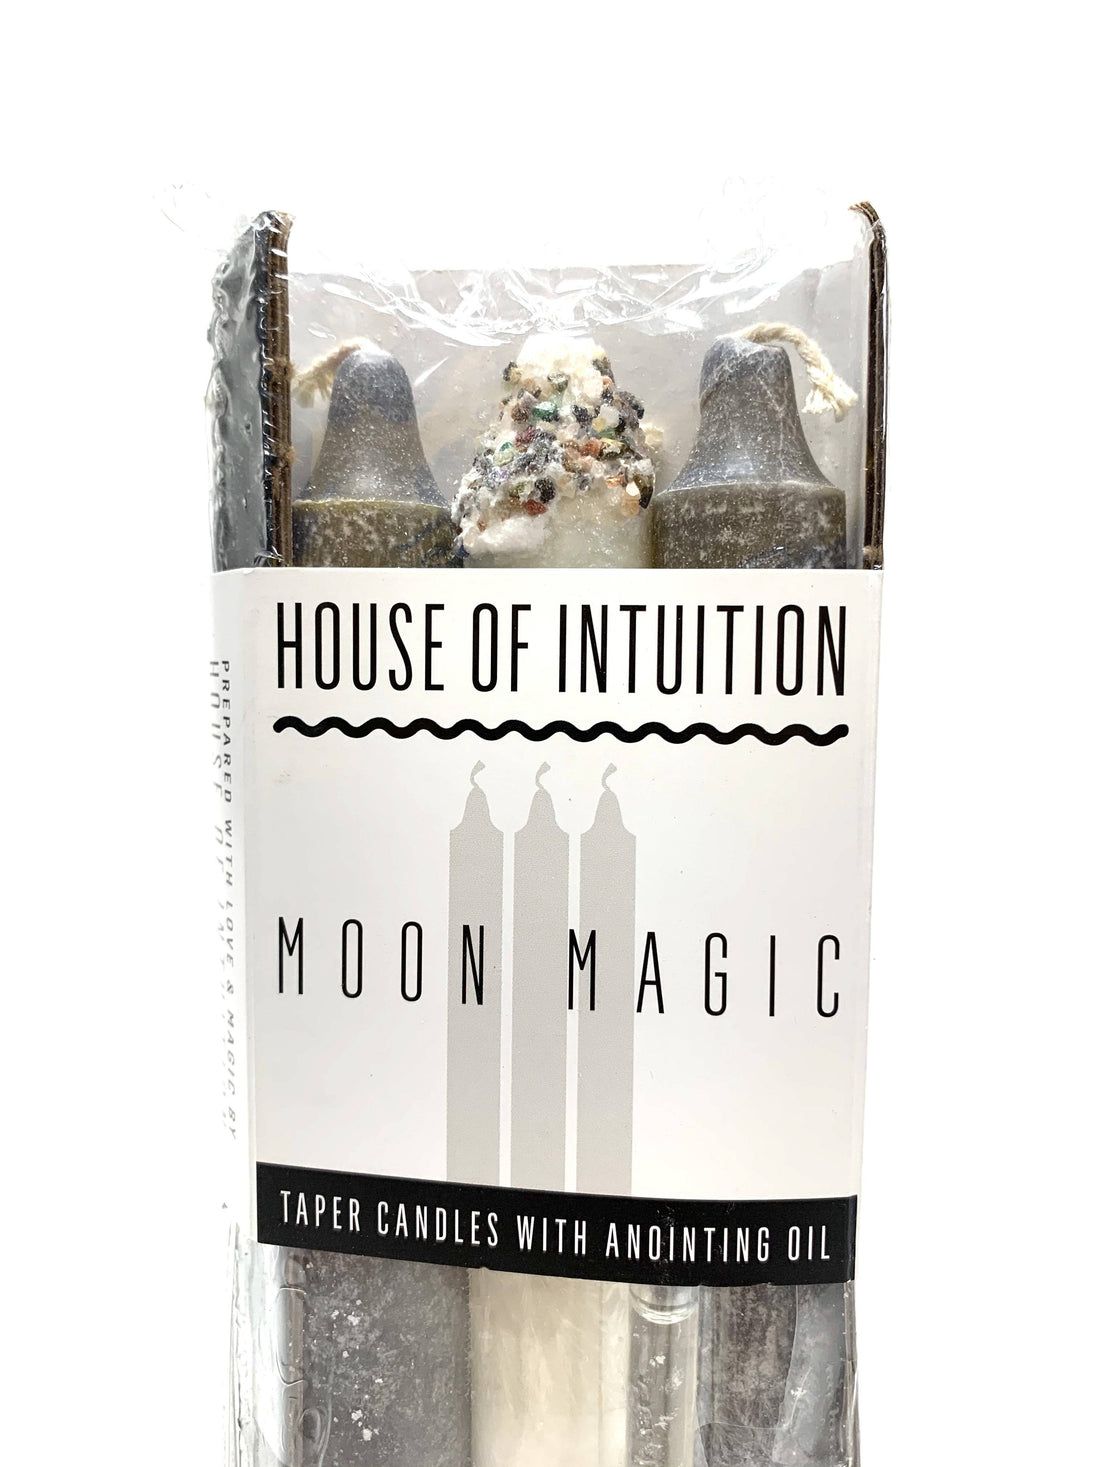 Taper Intention Candle Set - Moon Magic Taper Intention Candles House of Intuition 